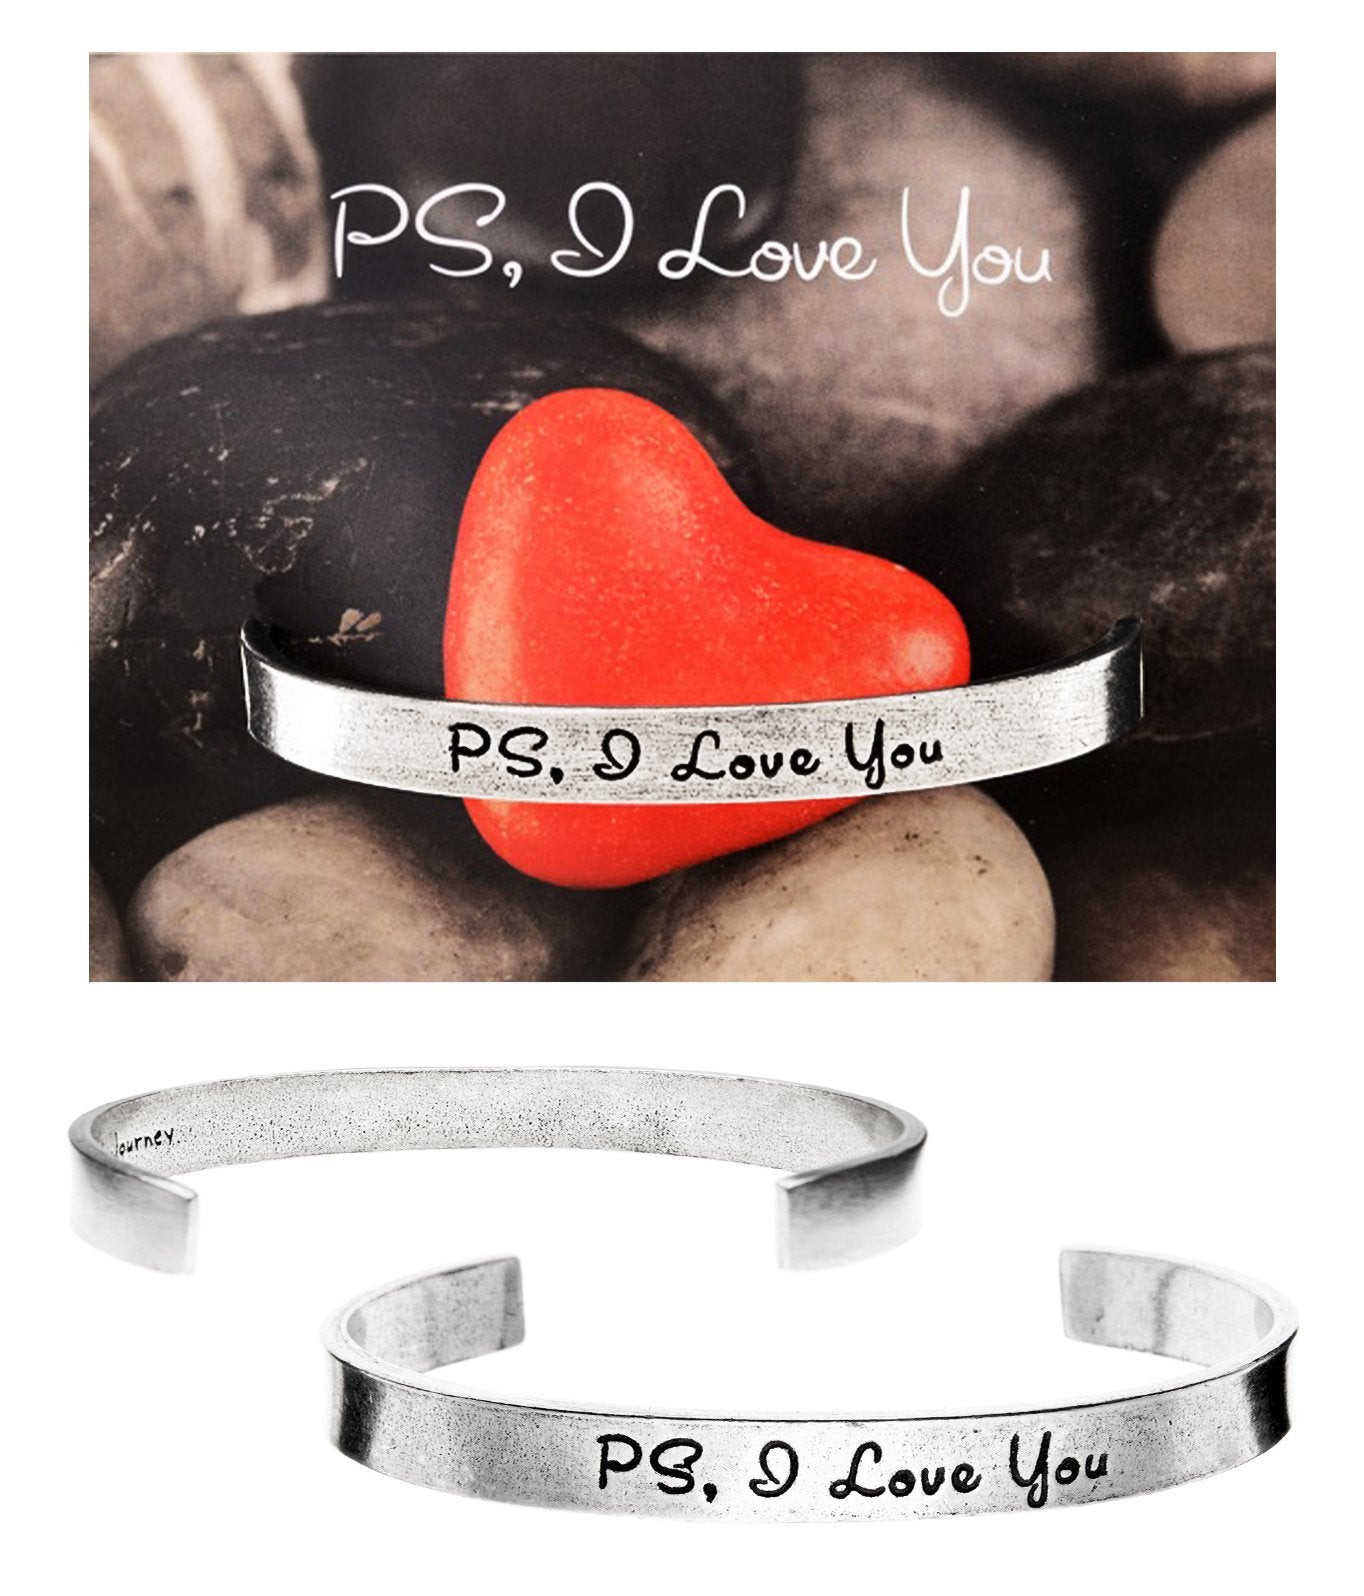 &quot;PS: I Love you&quot; Quotable Cuff on PS: I Love You Backer Card